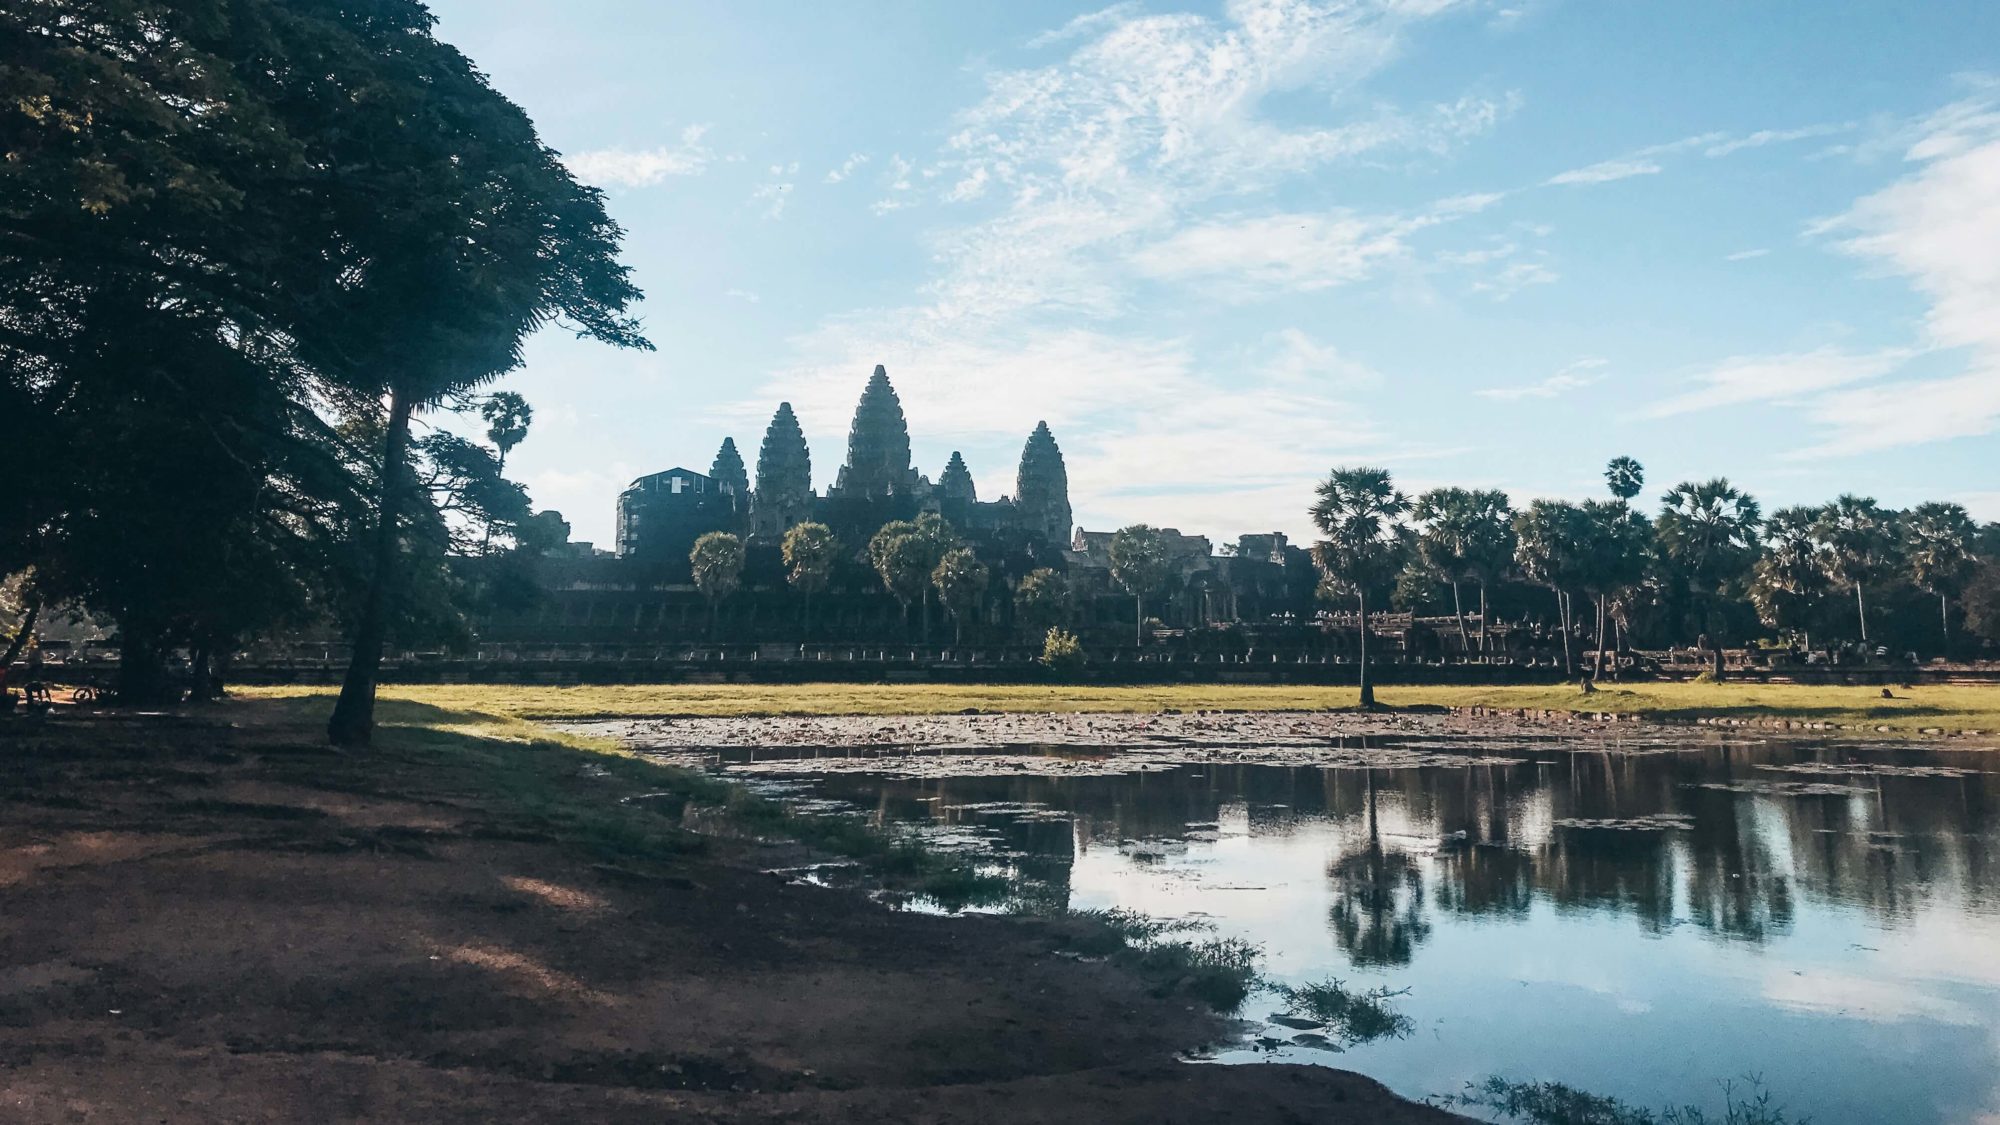 Sunrise at Angkor Wat an amazing thing to do in Cambodia